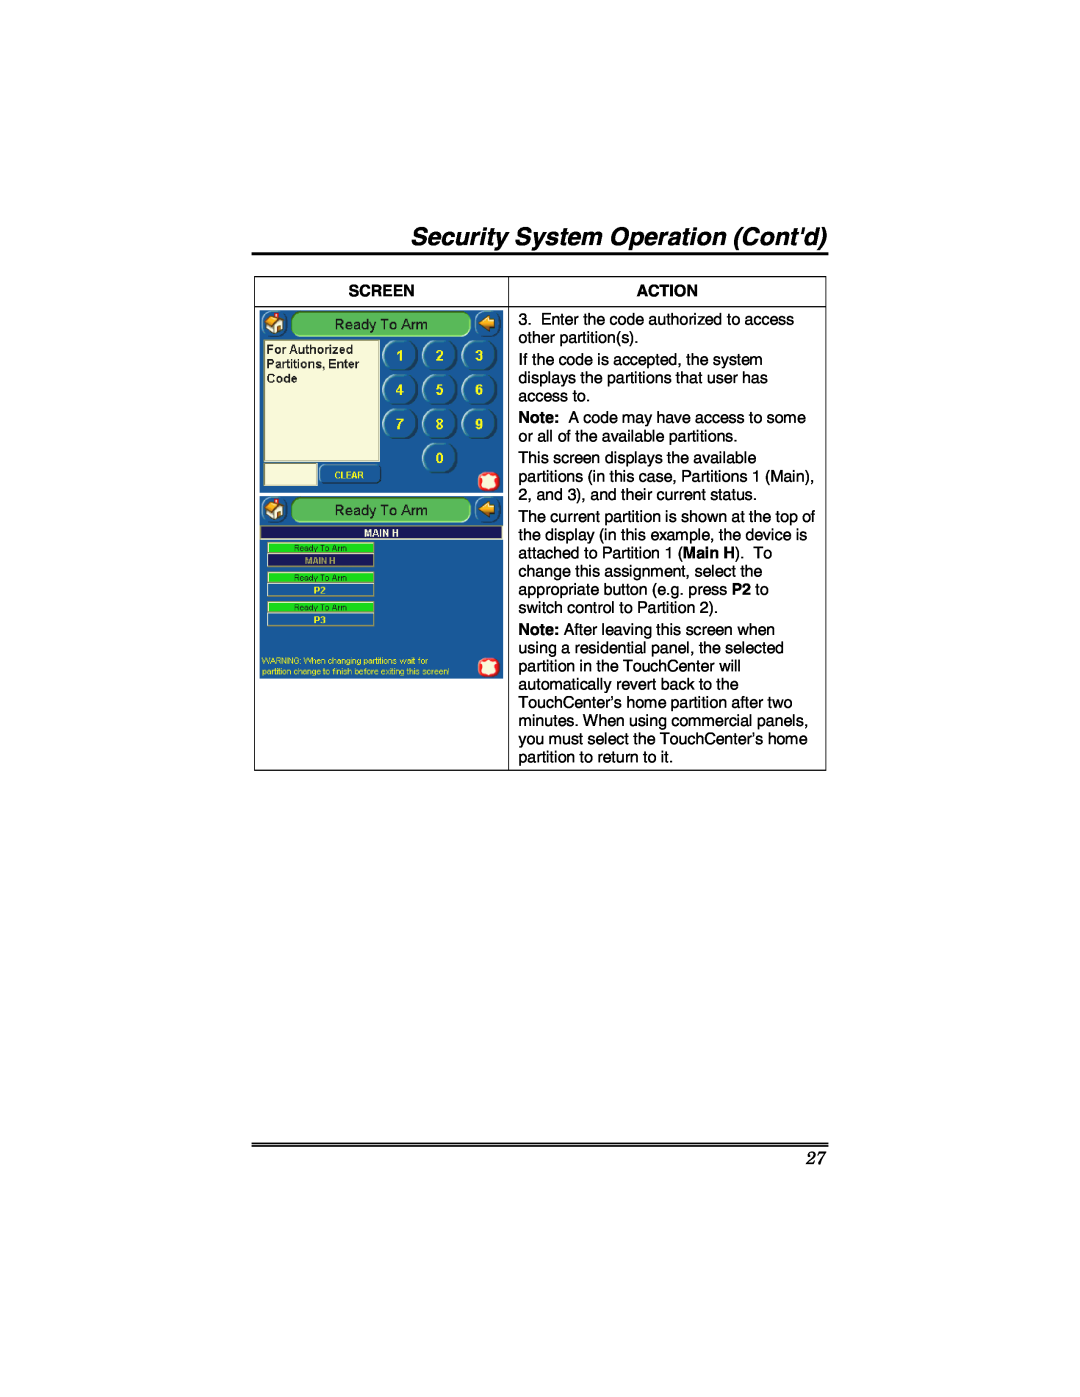 Honeywell 6271 manual Security System Operation Contd, Screen, Action, Enter the code authorized to access 